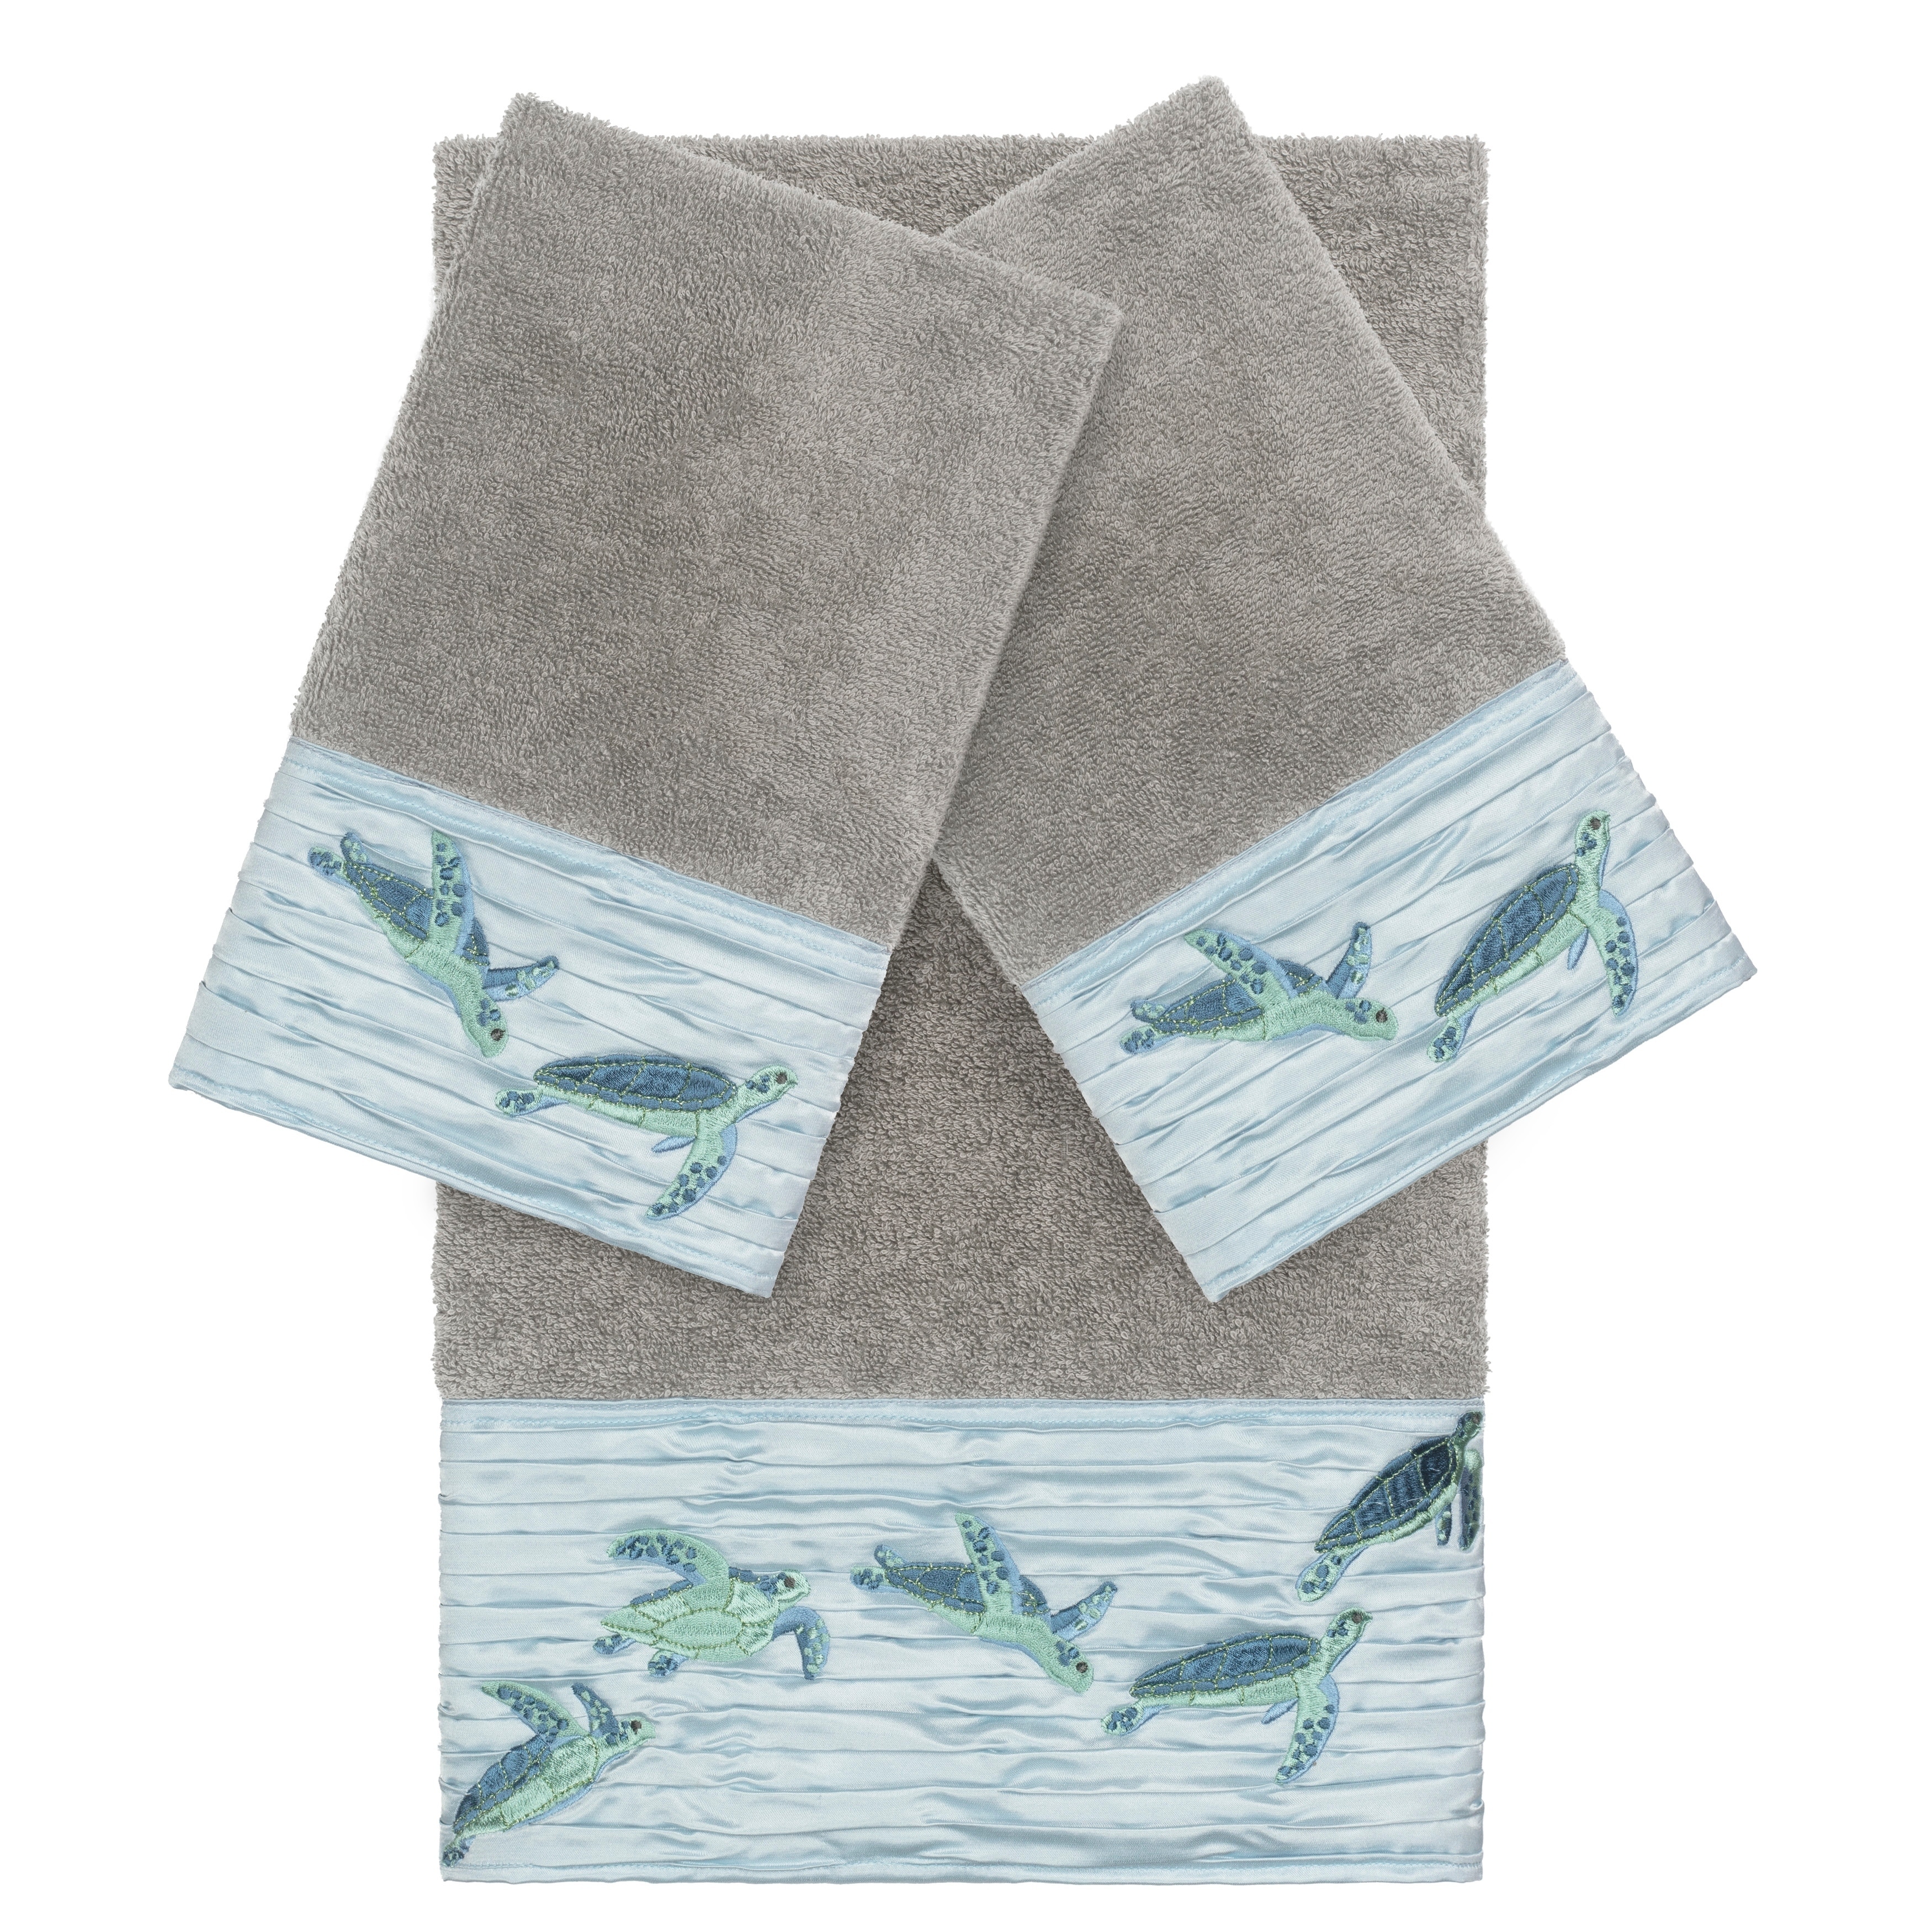 https://ak1.ostkcdn.com/images/products/22046192/Authentic-Hotel-and-Spa-Turkish-Cotton-Turtles-Embroidered-Dark-Grey-3-piece-Towel-Set-48c4ec23-8993-470c-8ca1-6149327fbdab.jpg